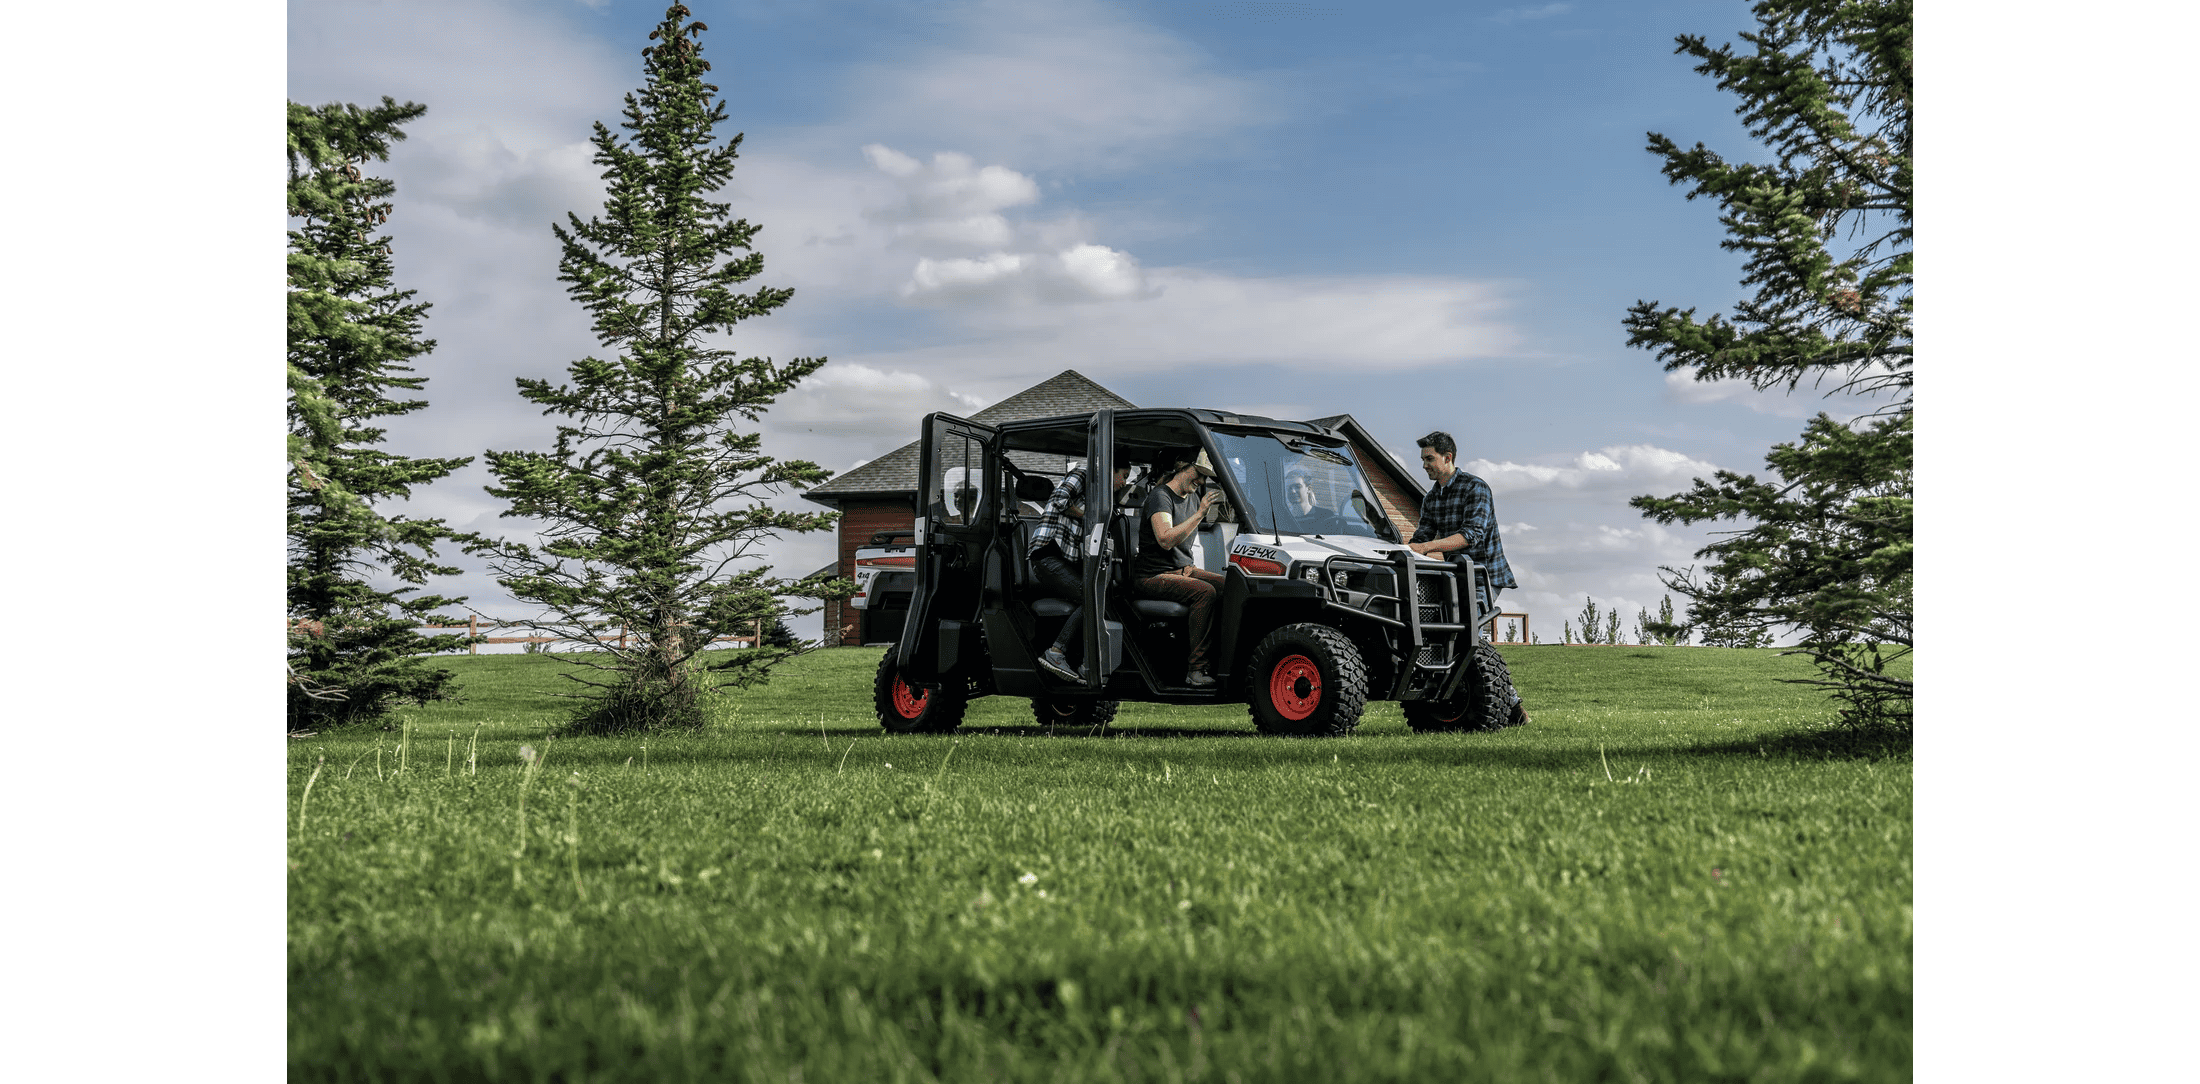 Browse Specs and more for the Bobcat UV34XL (Gas) Utility Vehicle - Bobcat of the Rockies